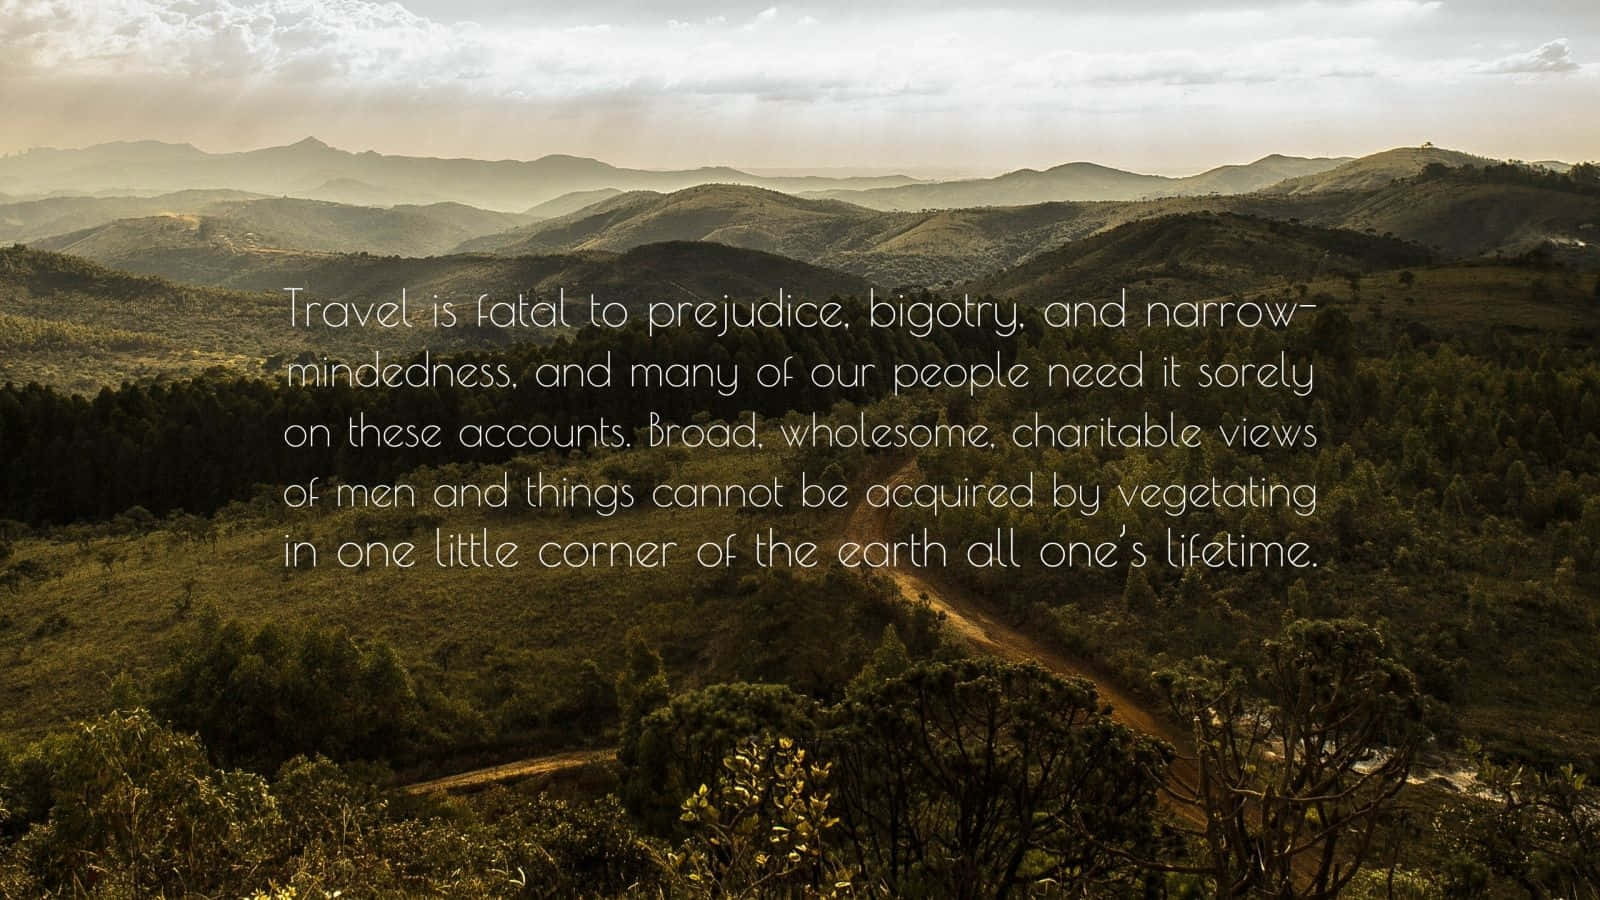 Inspirational Travel Quote Over Mountain View.jpg Wallpaper